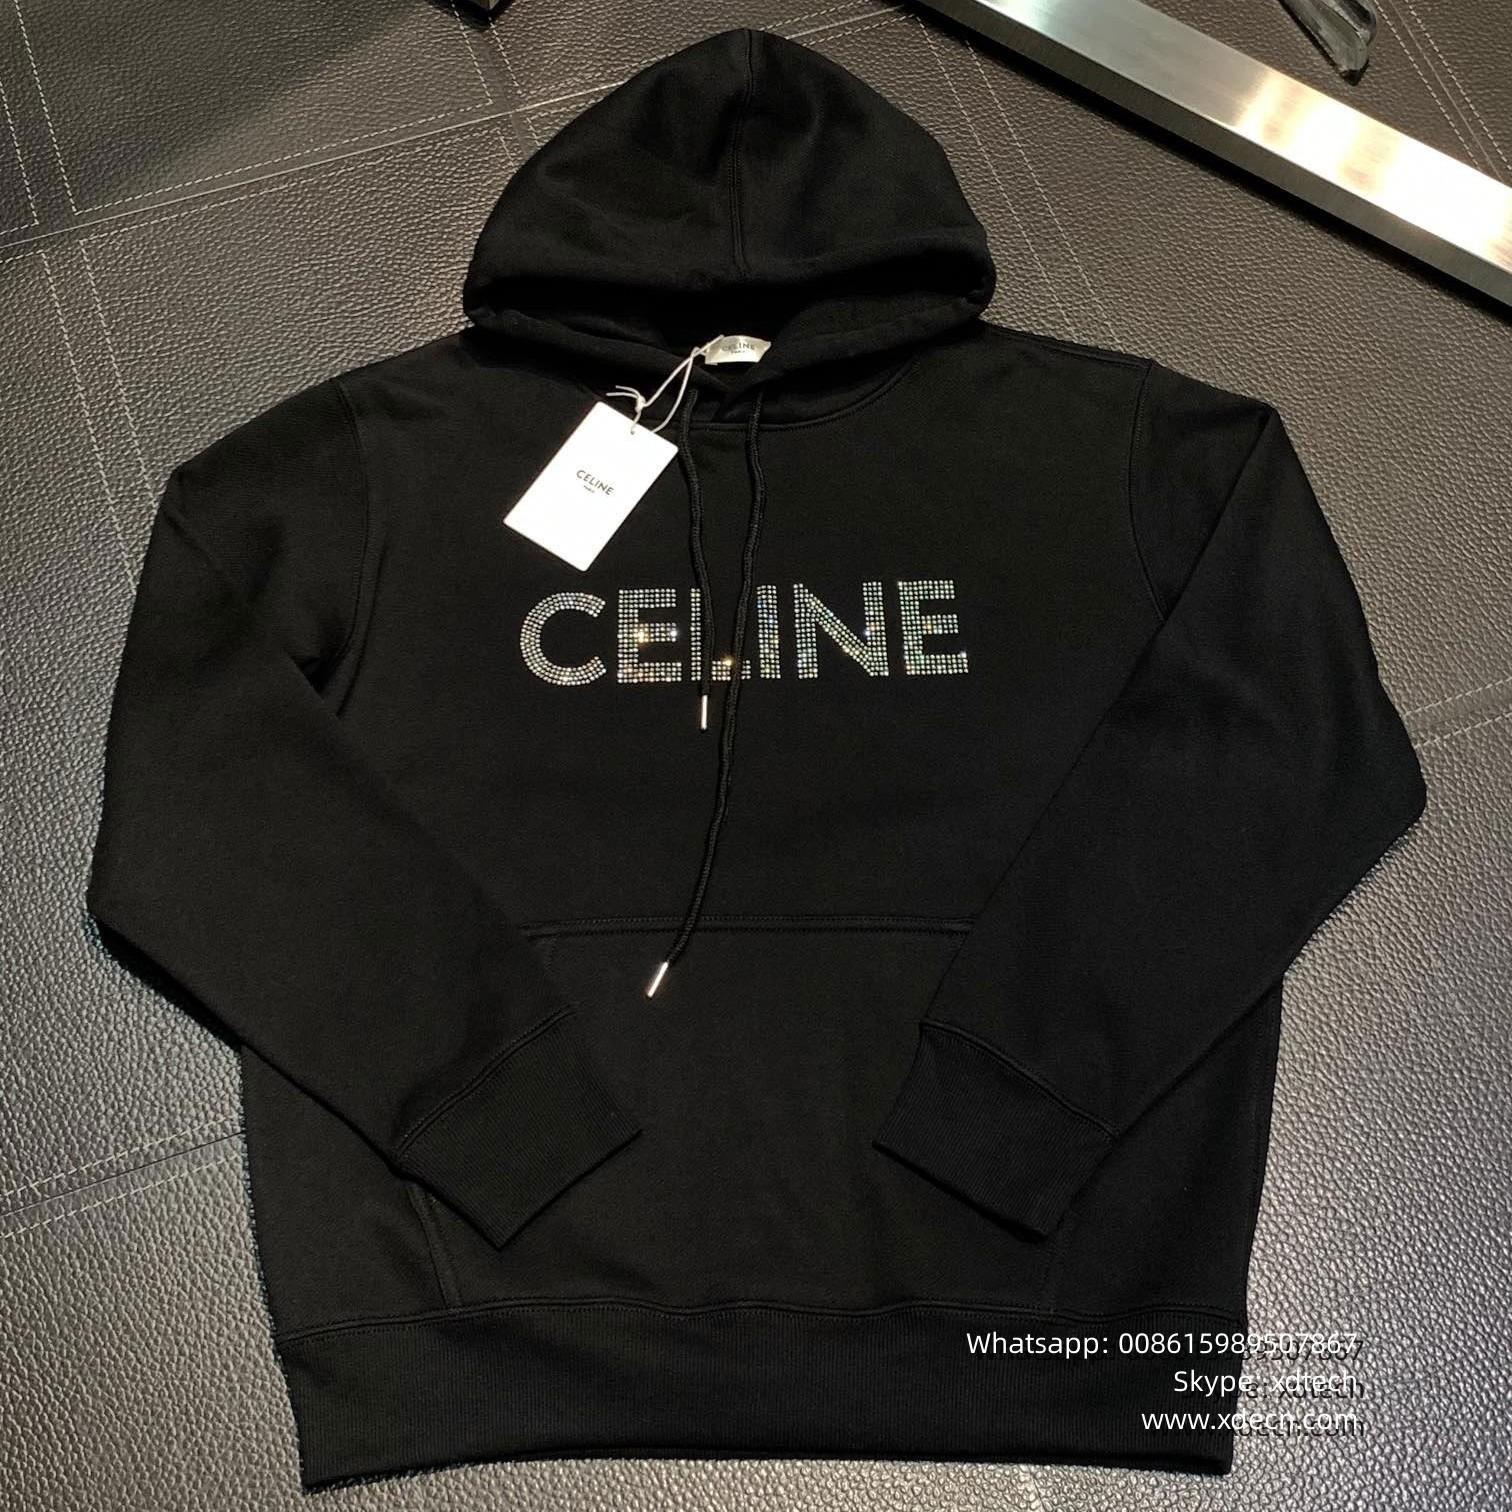 Celline Hoodies Different Colors Avaliable 3